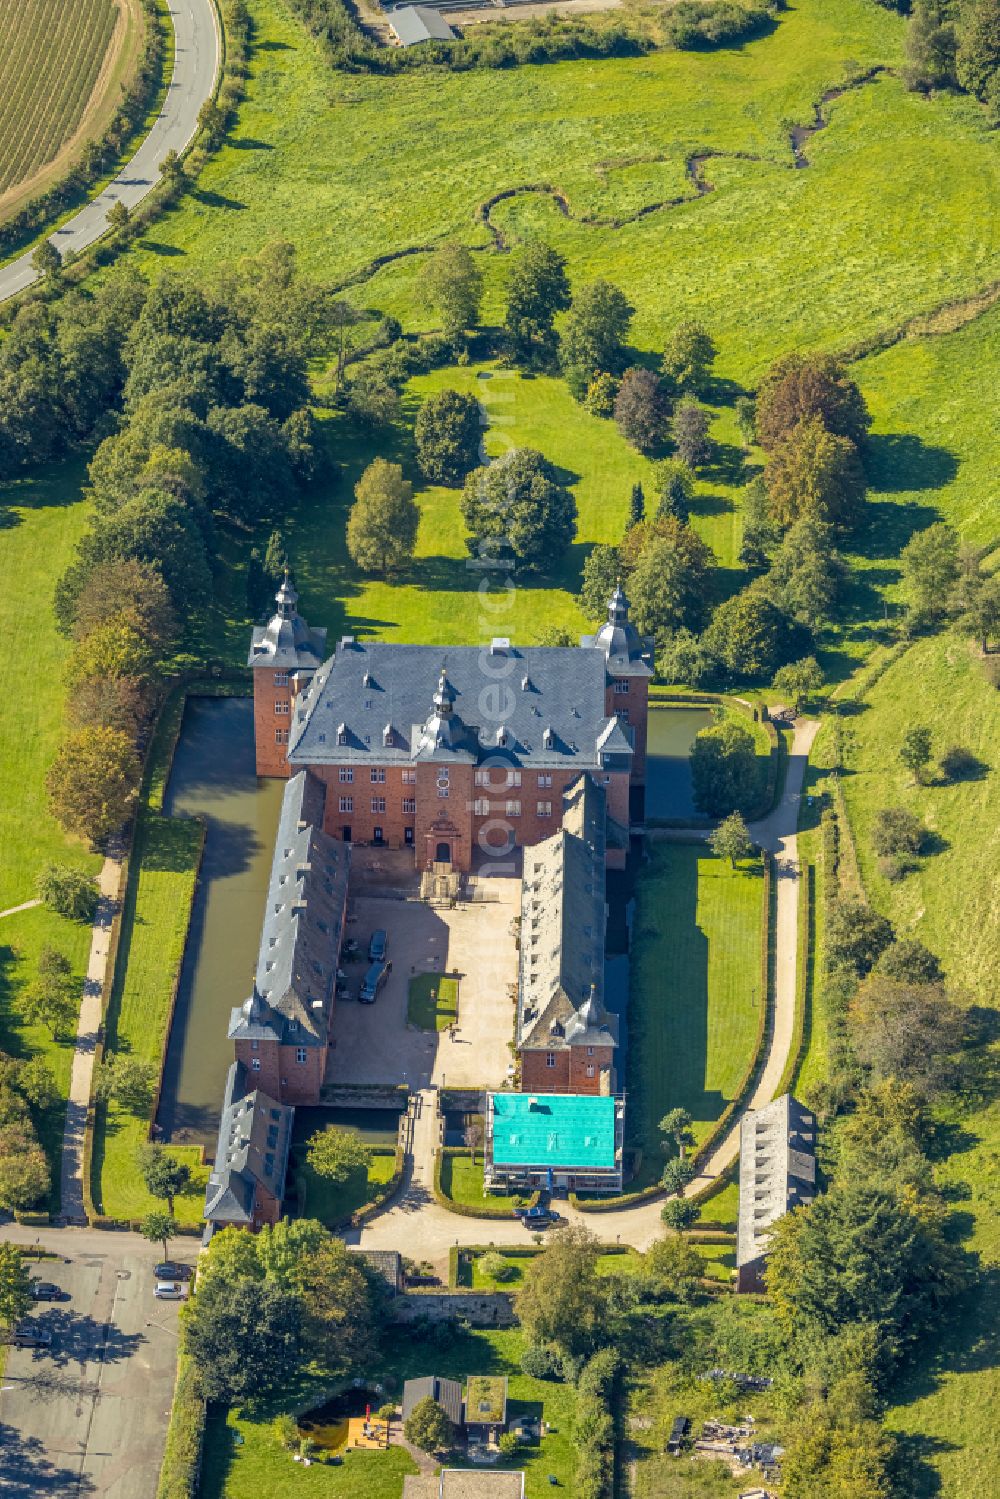 Aerial image Kirchhundem - Castle Adolfsburg in the borough of Kirchhundem in the state of North Rhine-Westphalia. The water castle is located in the Oberhundem part of the borough and was built in the 1670s as a recreational manor. It is renowned for its western front with the two towers. The u-shaped compound also includes an elaborate courtyard and a park